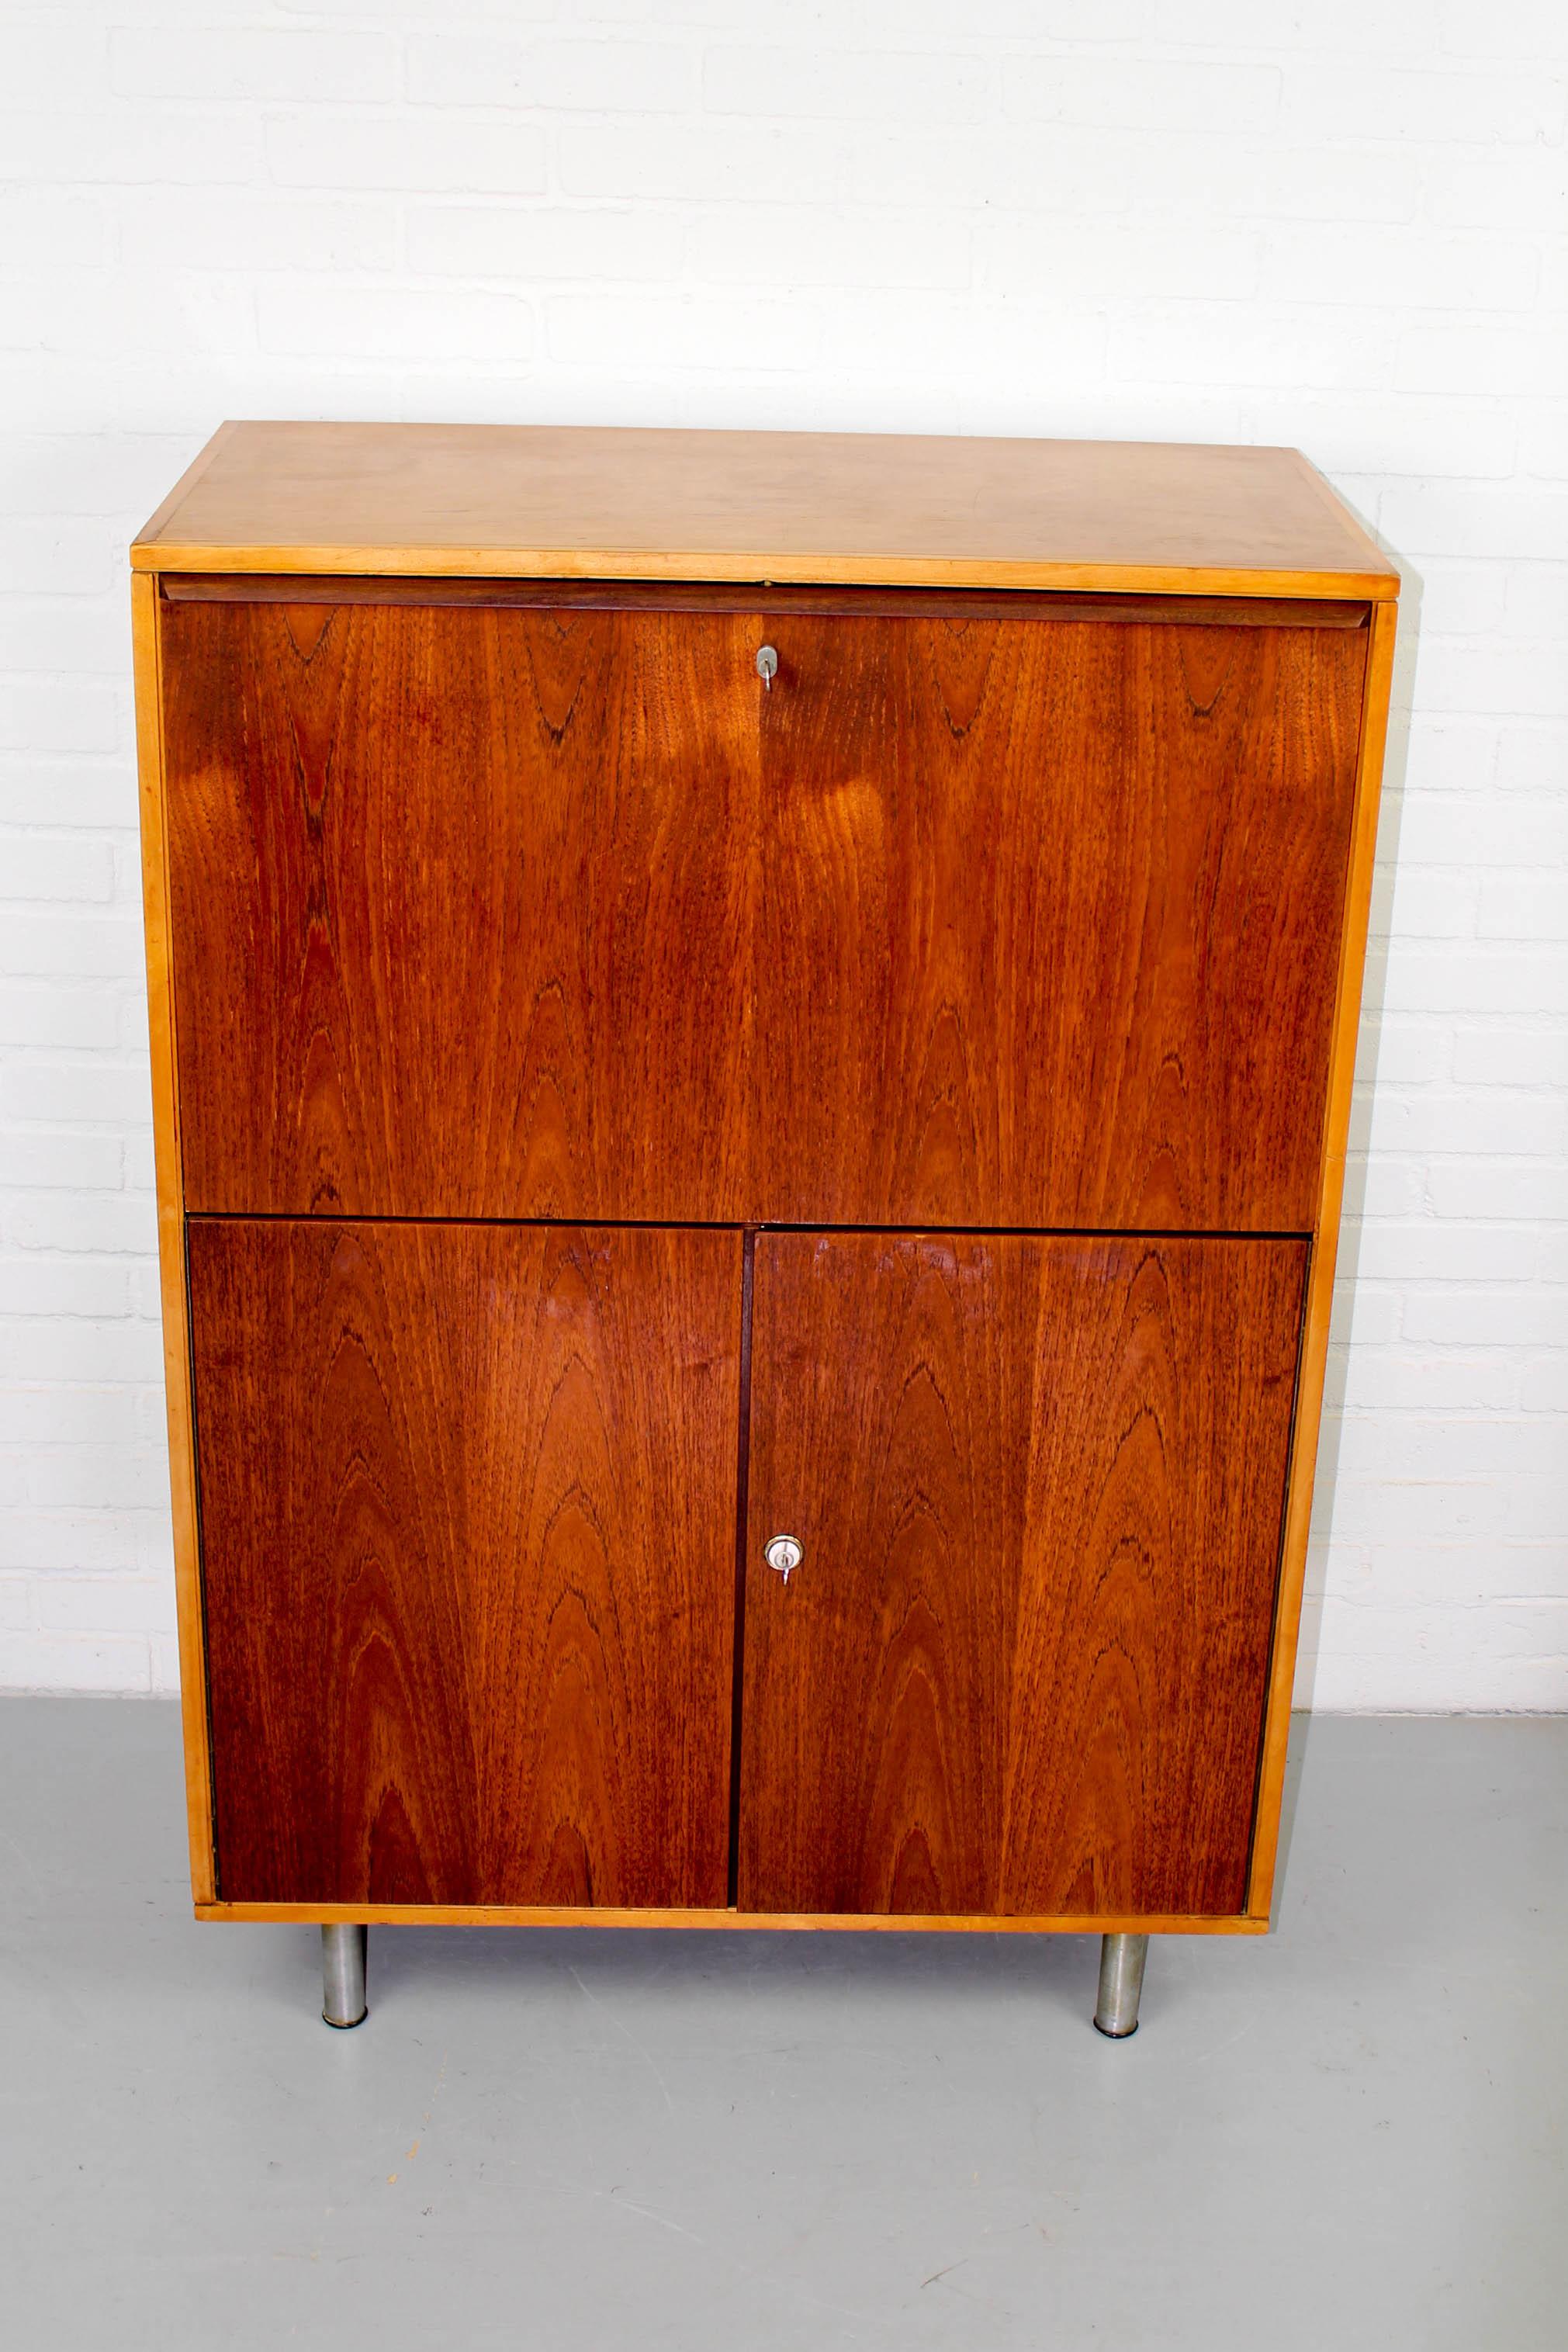 Rare Cees Braakman desk and cabinet with birch body and teak doors with the original metal legs and inner desk organizer. In very good original condition . Locks works and keys are available. Dimensions: 118cm H, 81cm W and 43 cm D.